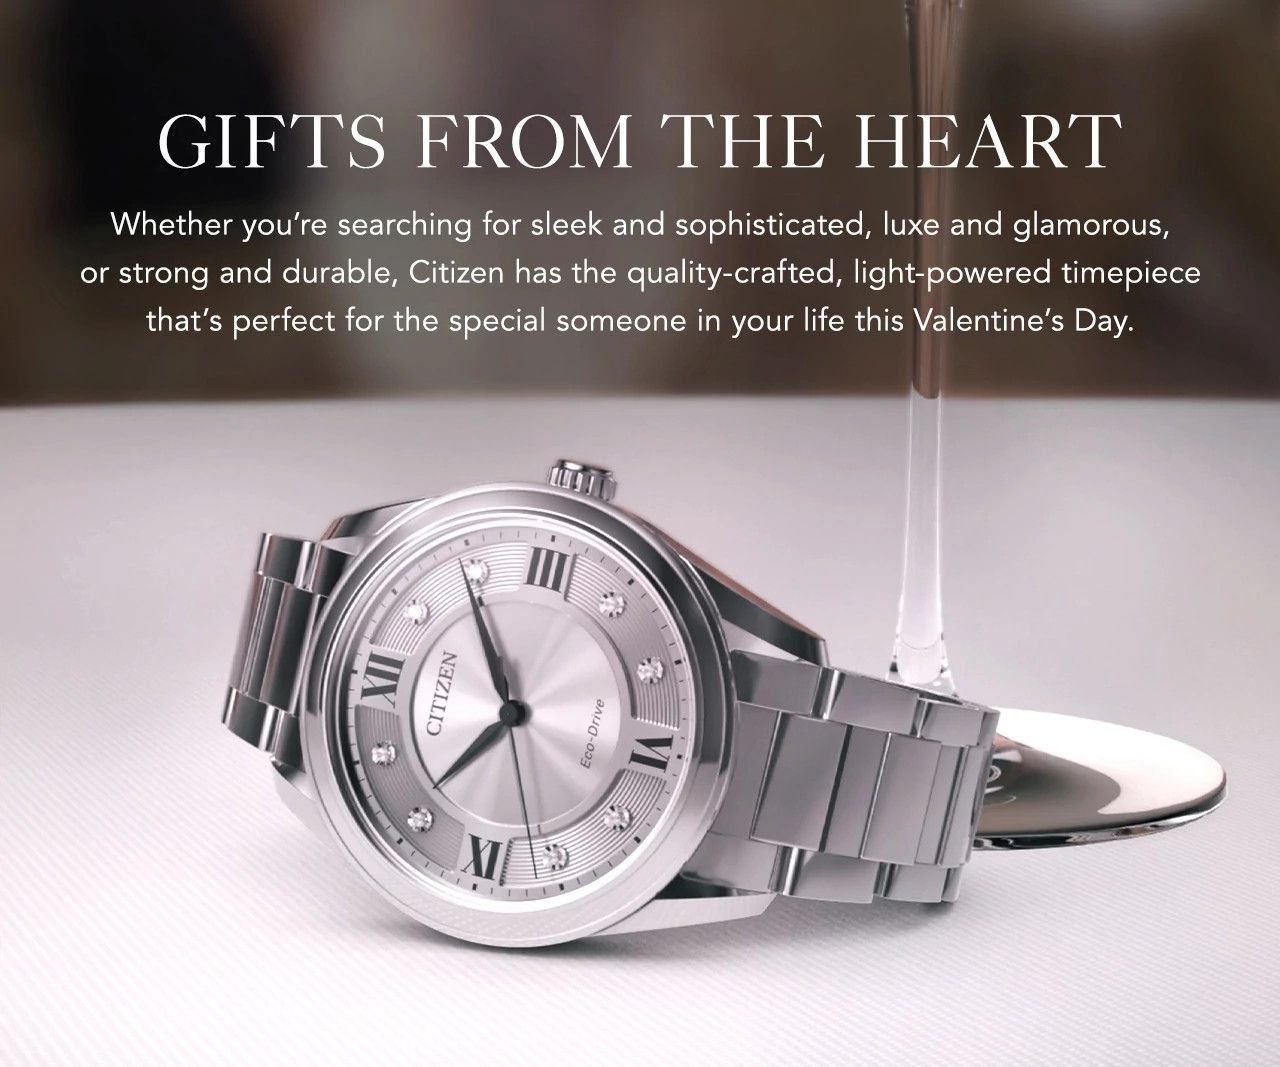 Gifts From The Heart: Whether you’re searching for sleek and sophisticated, luxe and glamorous, or strong and durable, Citizen has the quality-crafted, light-powered timepiece that’s perfect for the special someone in your life this Valentine’s Day. 